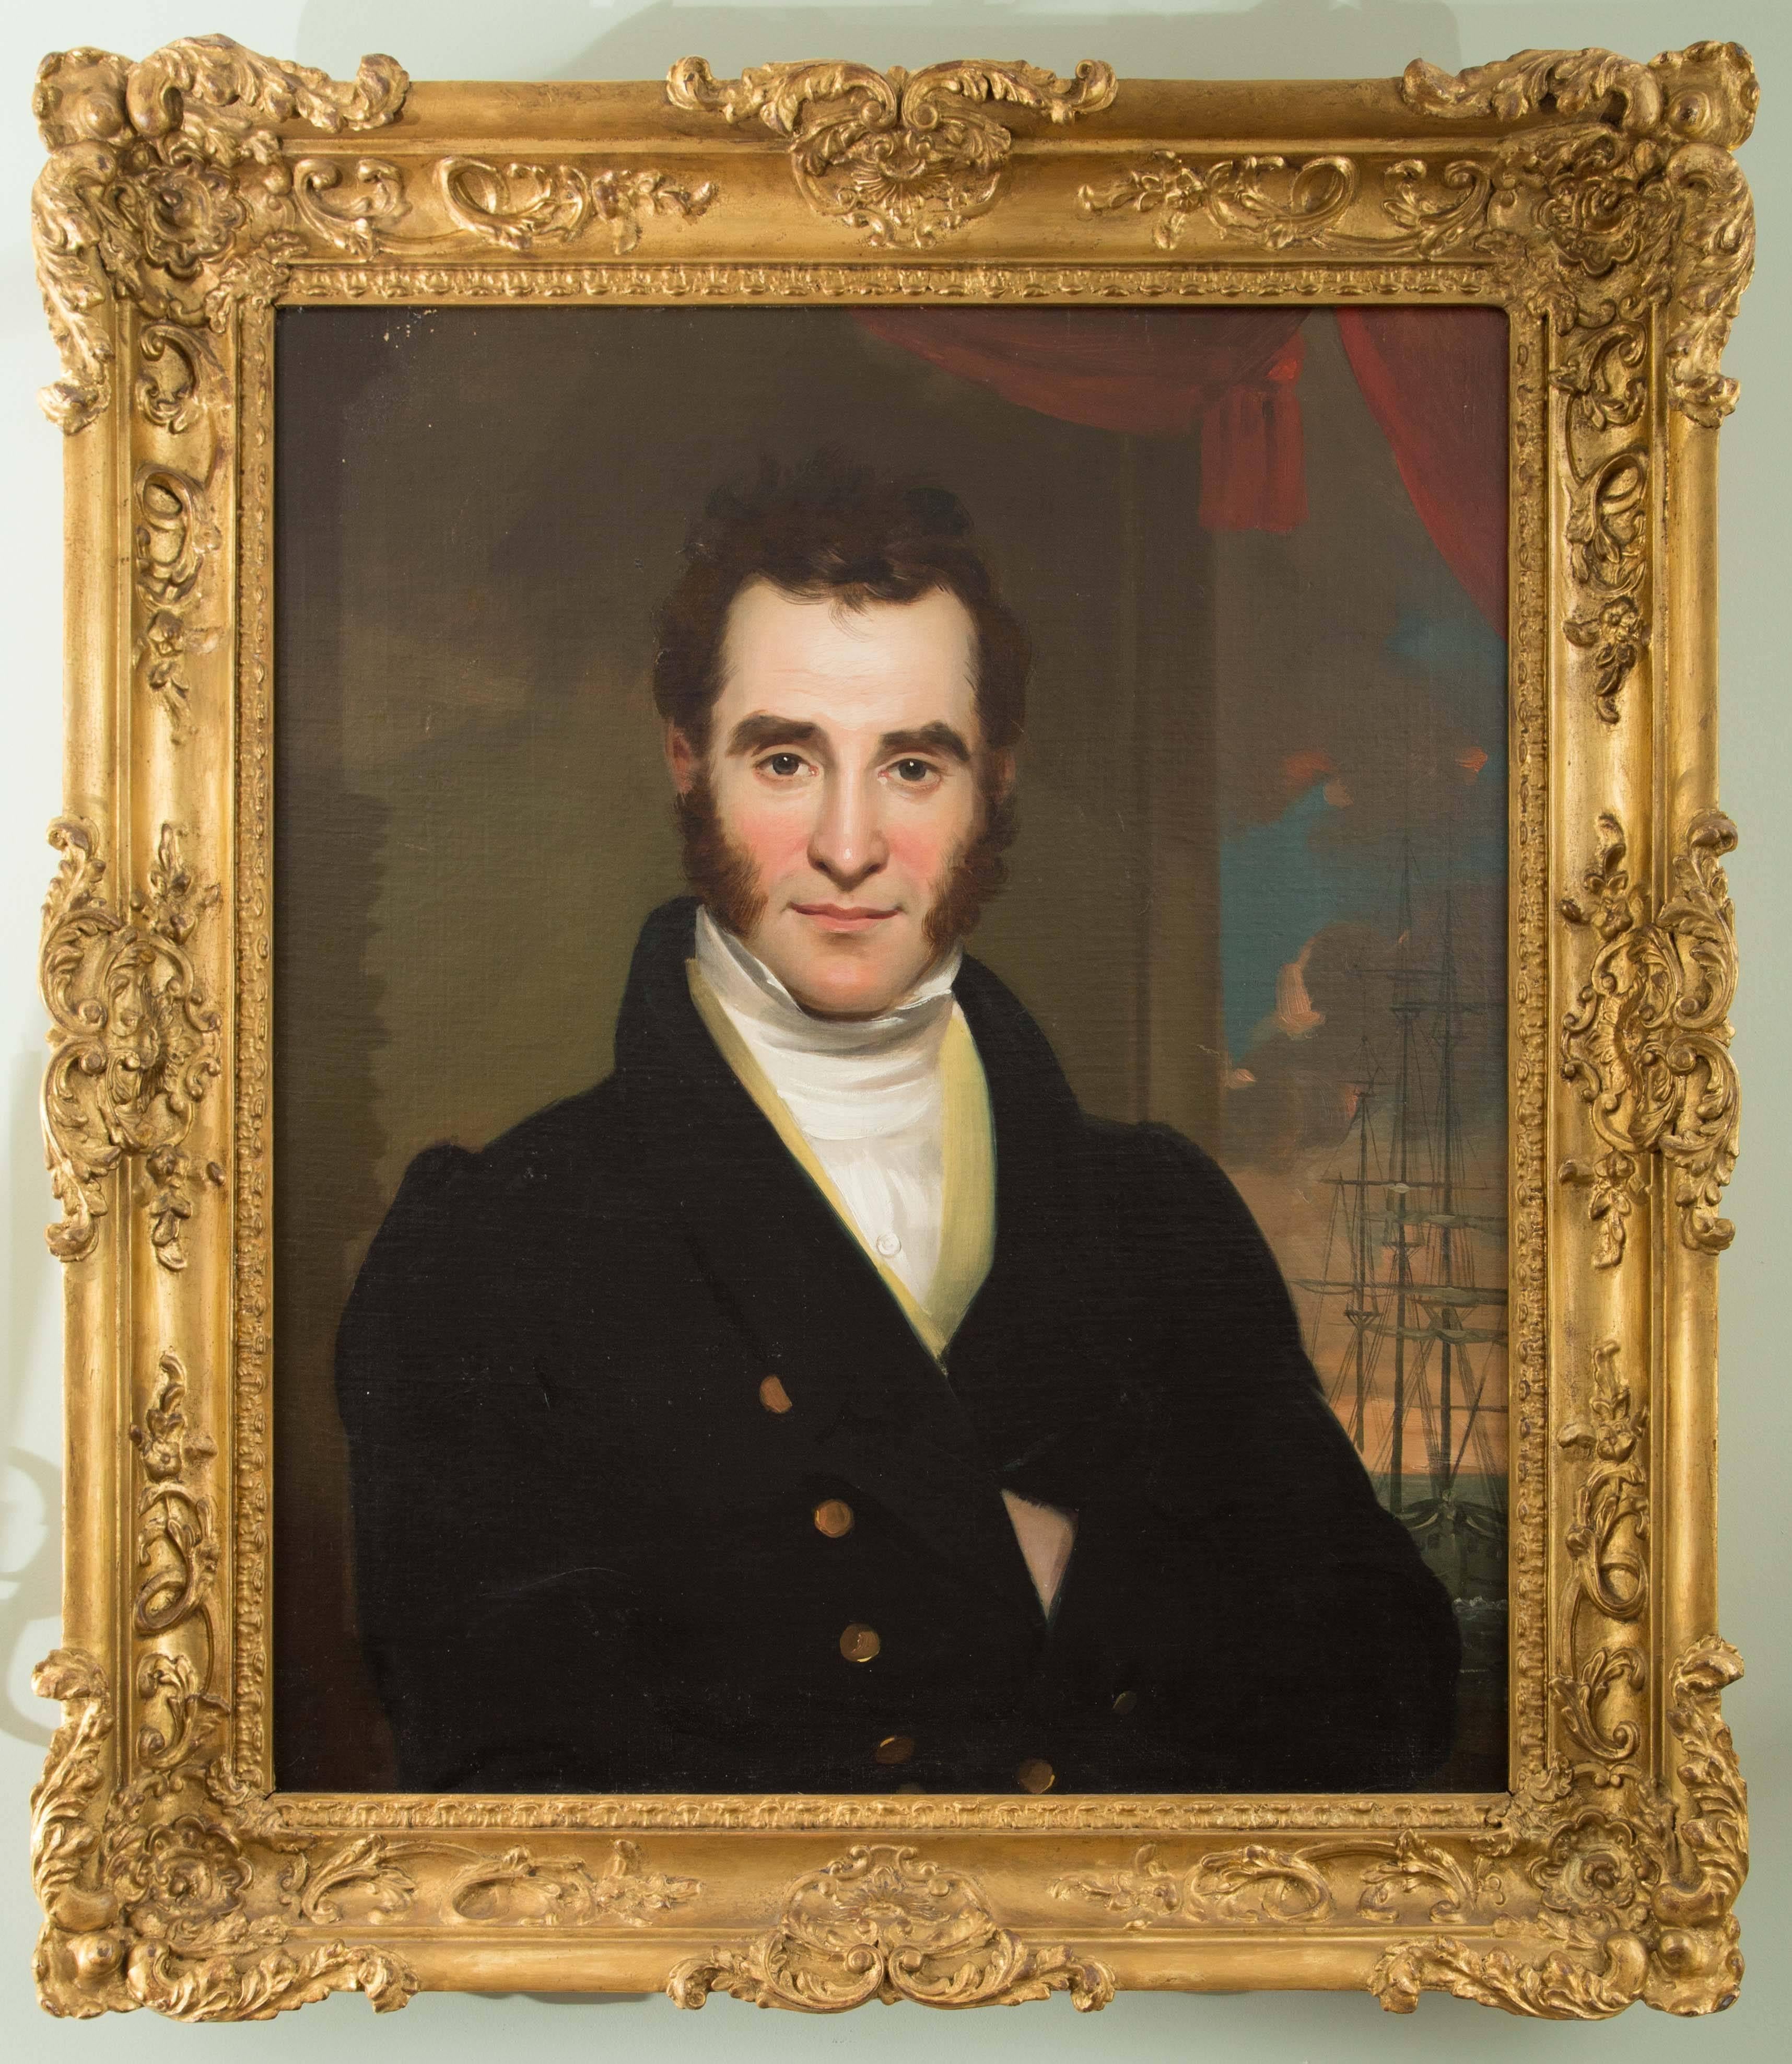 Oil on canvas portrait of a sea captain in original carved gold-leaf frame. Sea captain is seated in front of a window with a view of a harbor and a masted ship.

John Neagle (1796-1865) was born in Boston but spent most of his life in